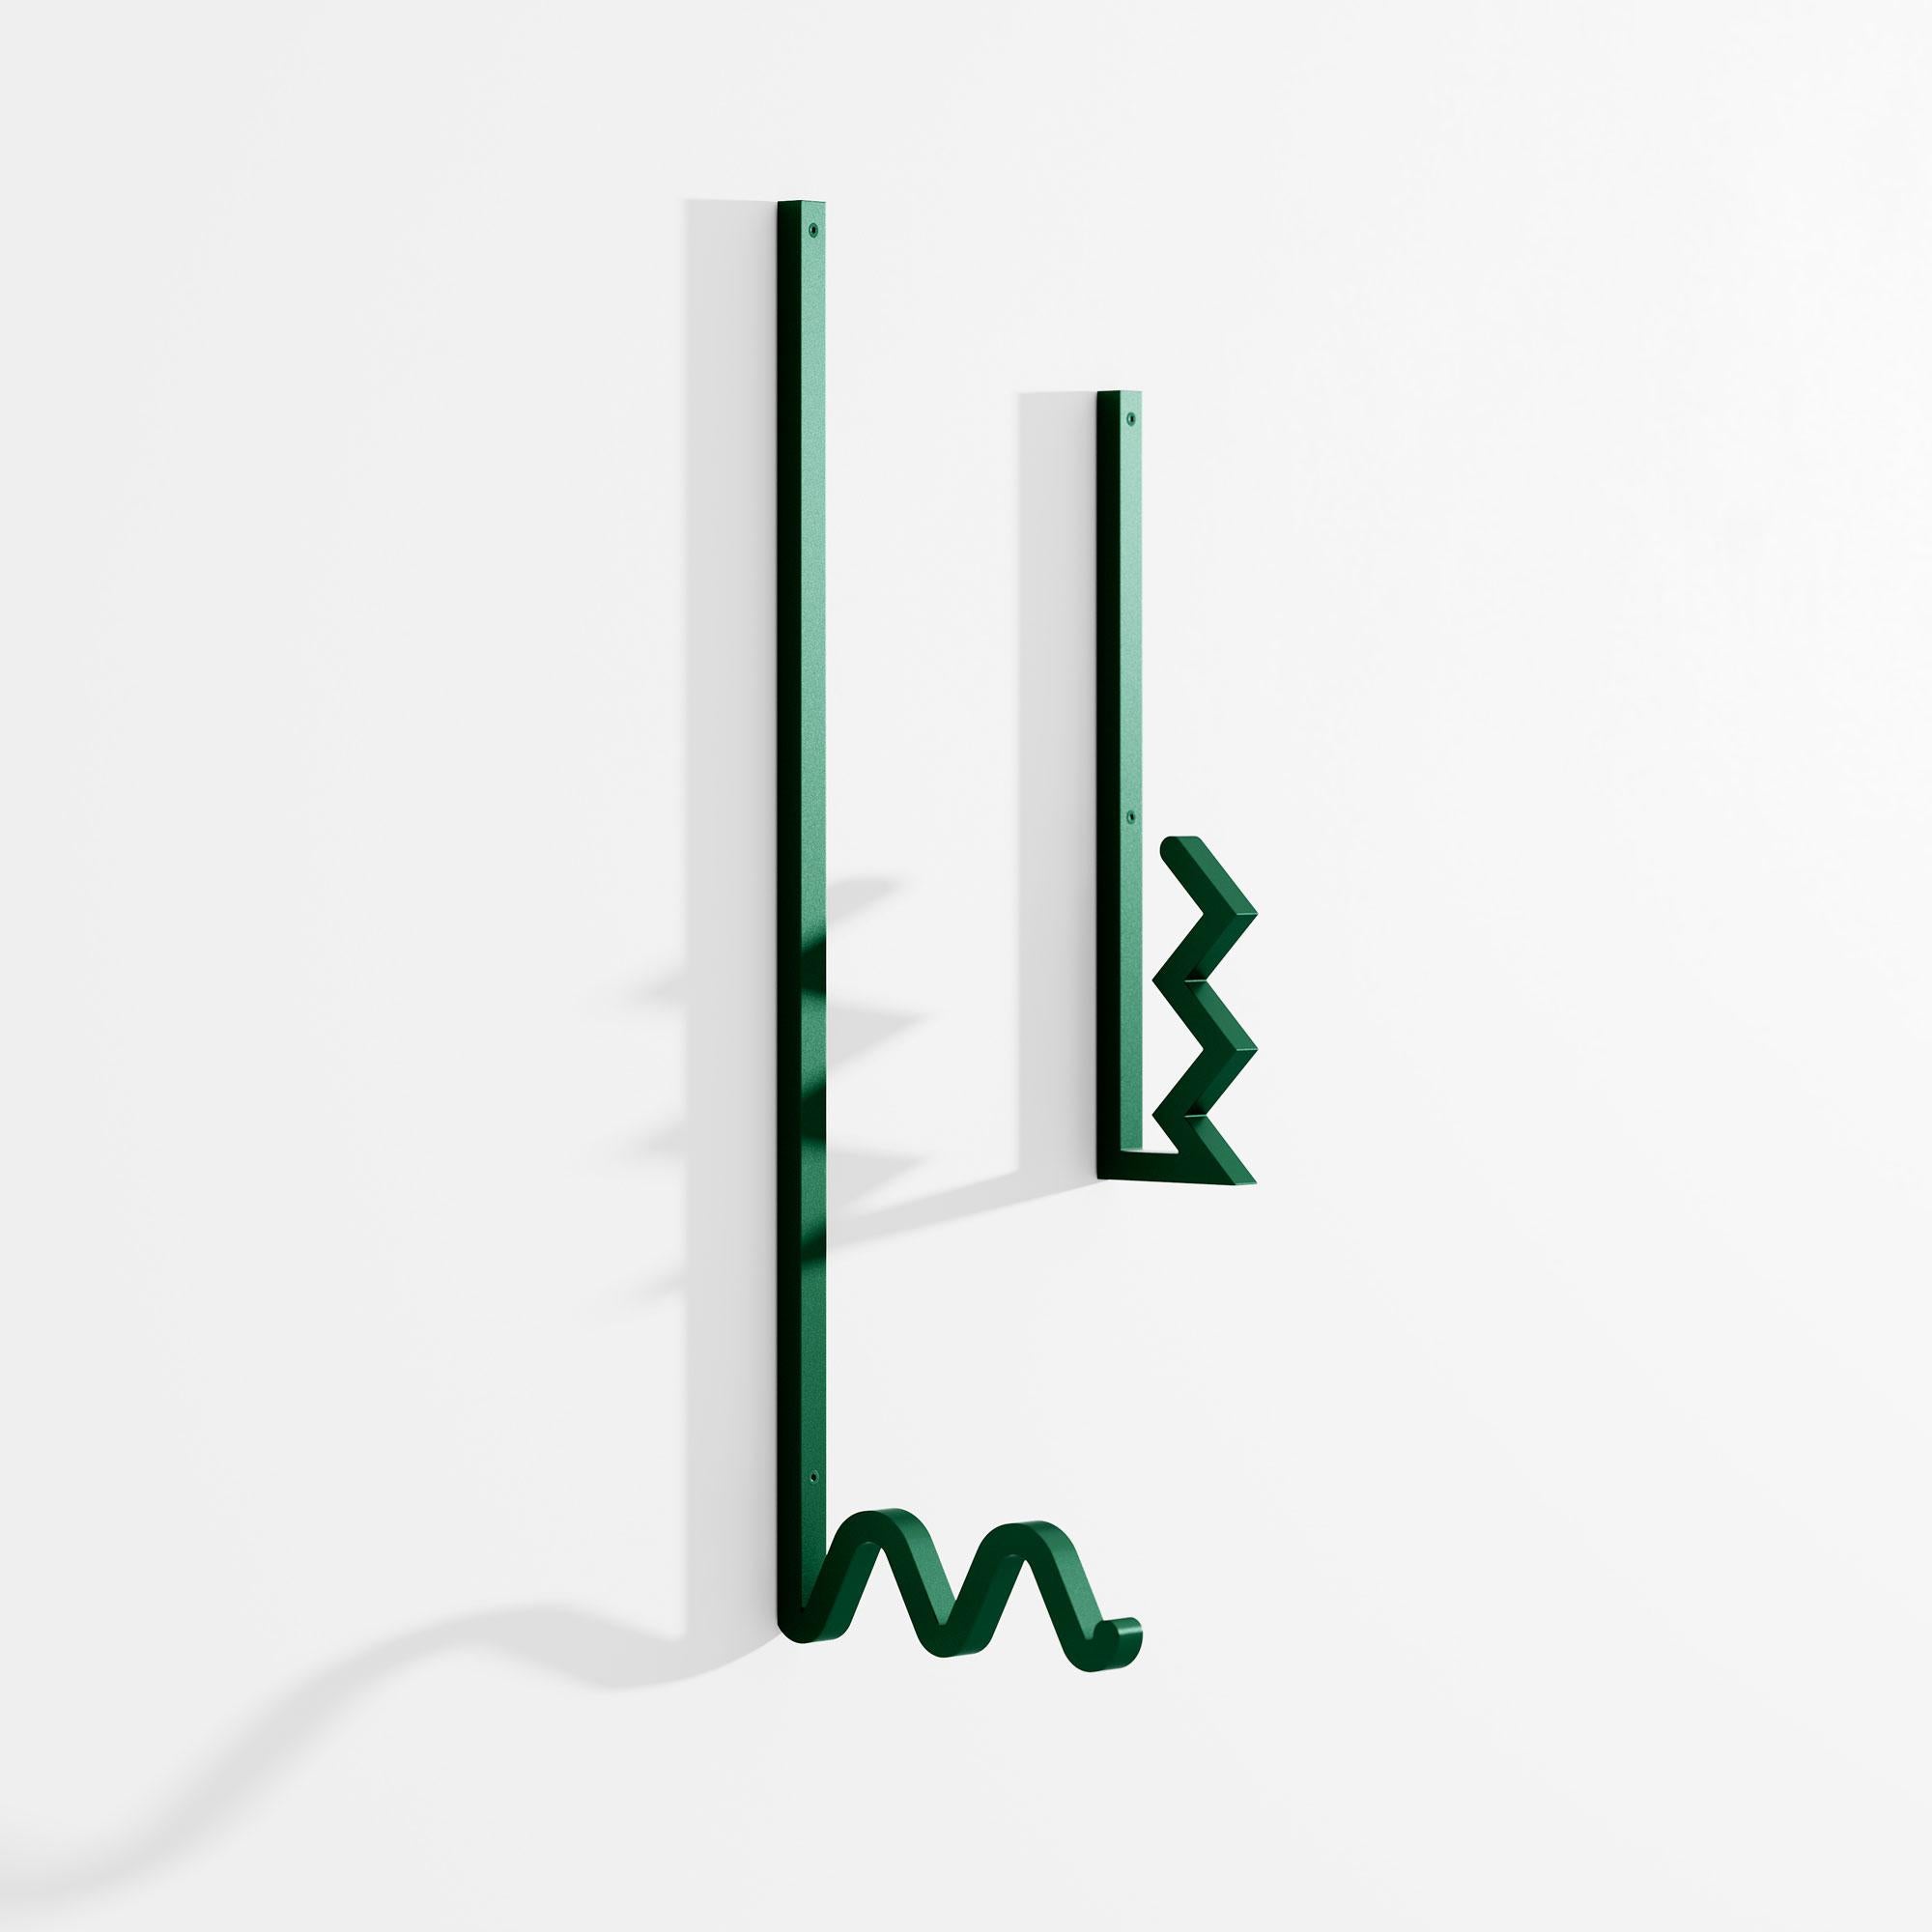 Set of 2 zag coat hanger by Bling Desing Studio.
Dimensions: H 26,5 x L 6, H 41 x L 14,2.
Materials: green textured metal.


Zag is a family of coat hooks whose shapes are inspired by barrettes and pins. Each Zag is like an imaginary letter